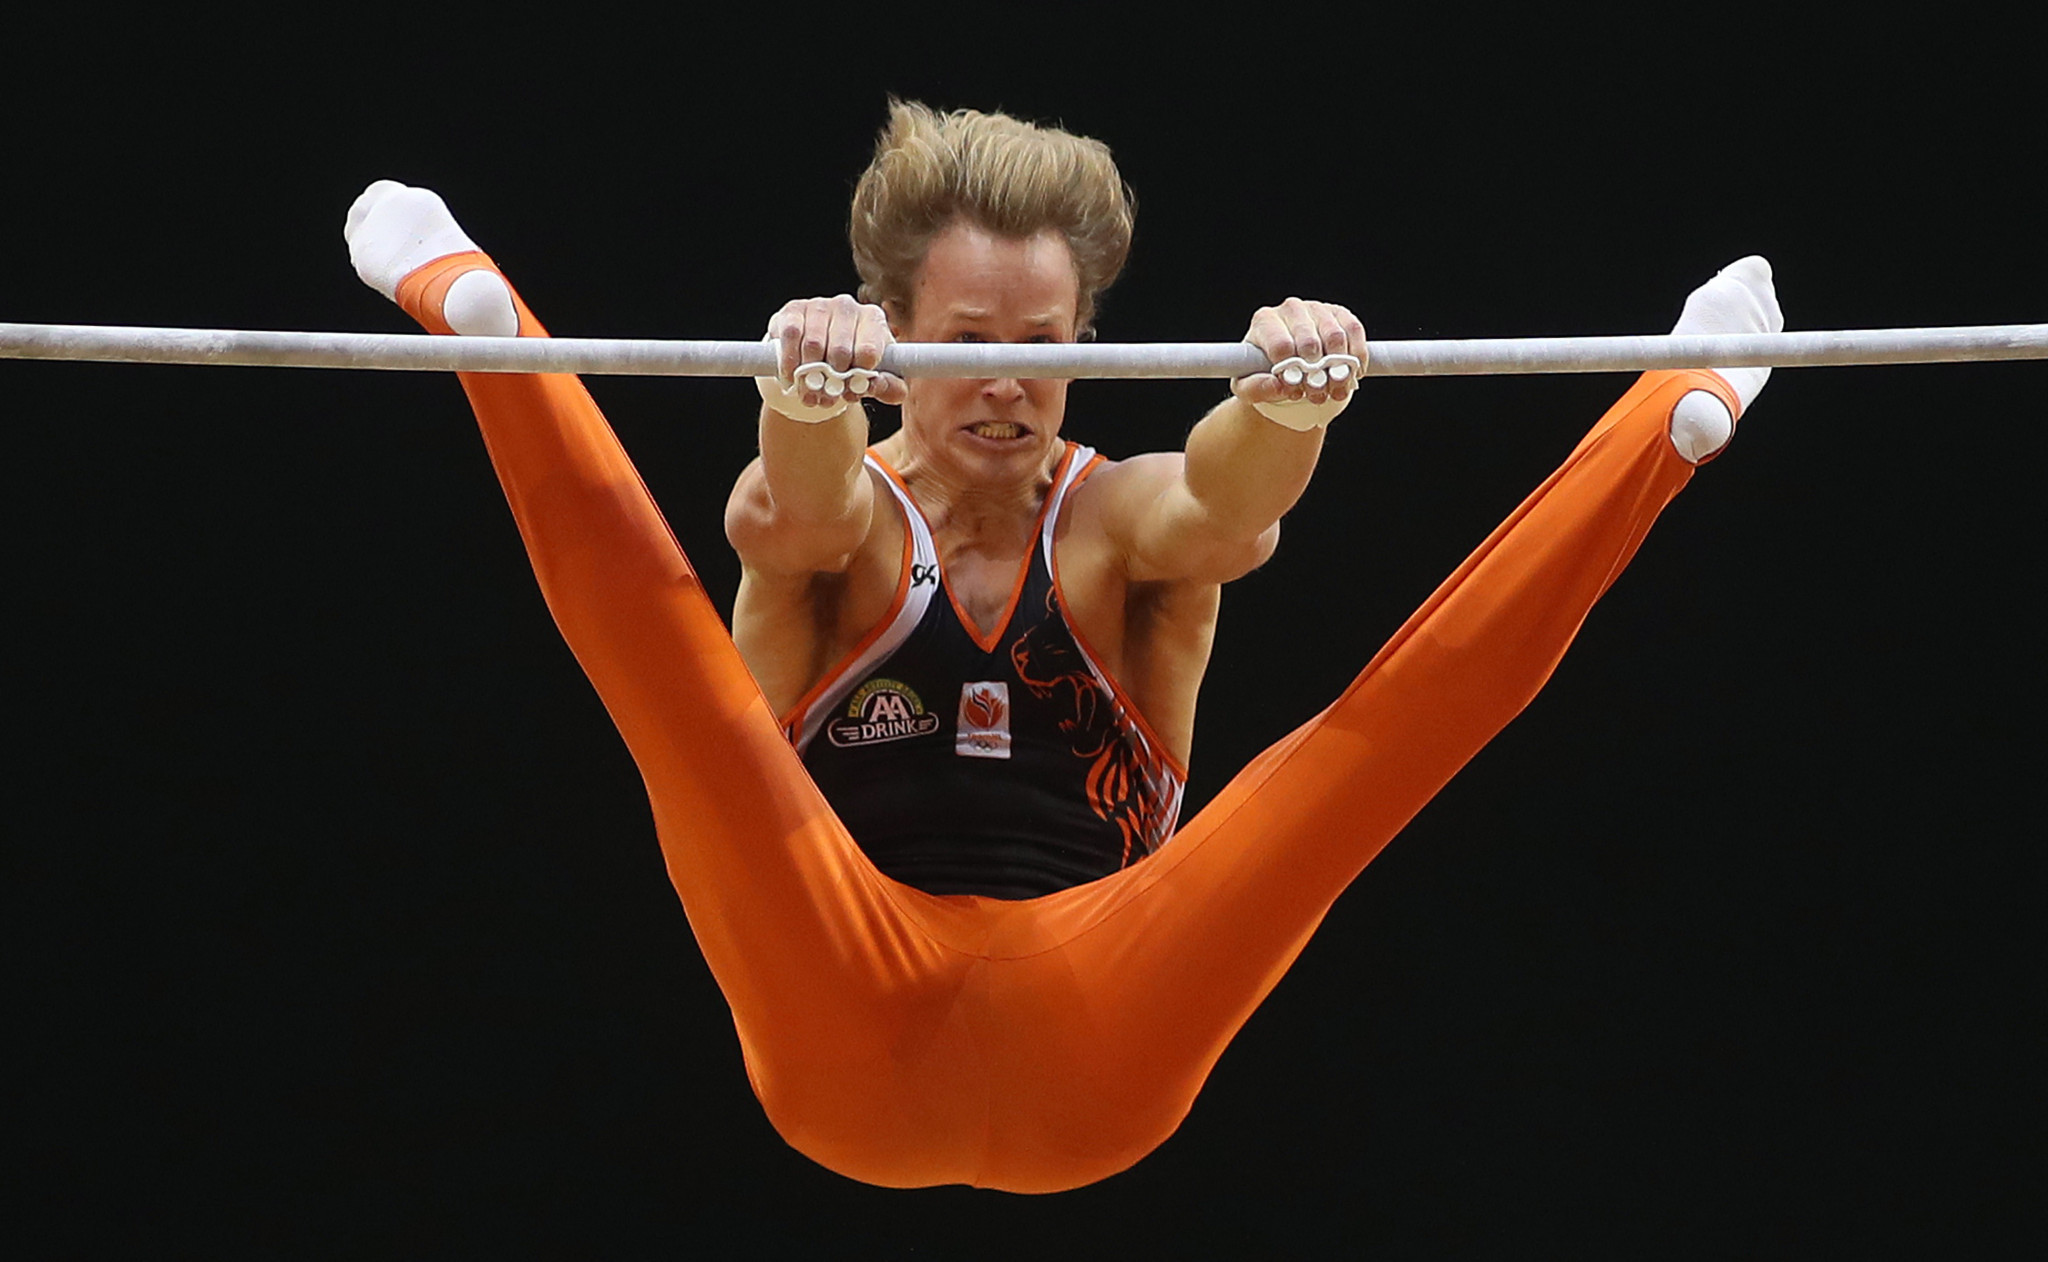 Olympic qualification points on the line at FIG Individual Apparatus World Cup in Baku